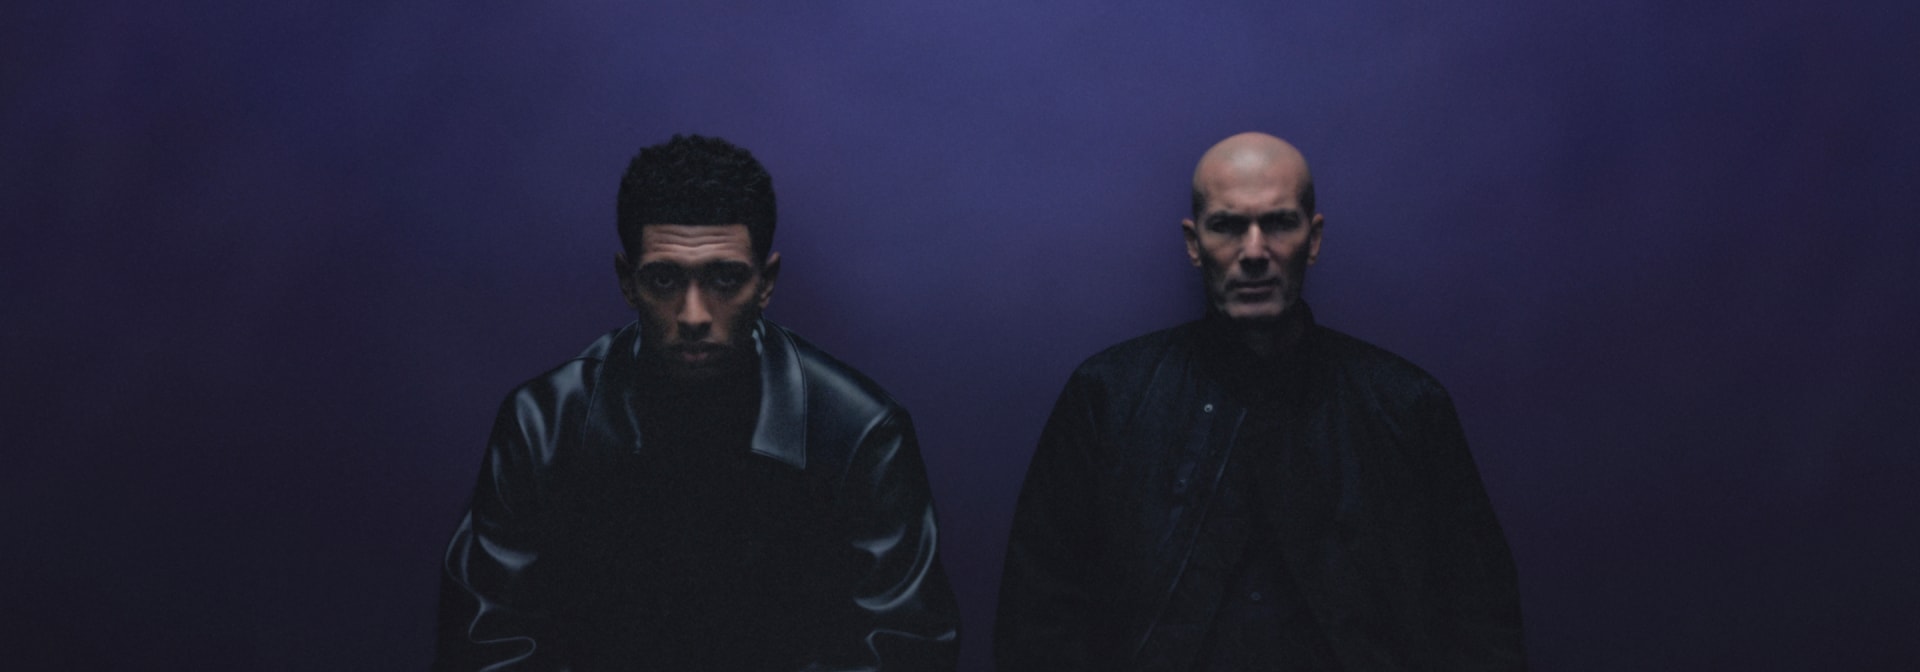 Jude Bellingham and Zinedine Zidane pose in front of a purple wall dressed from head to toe in black Y-3 apparel.